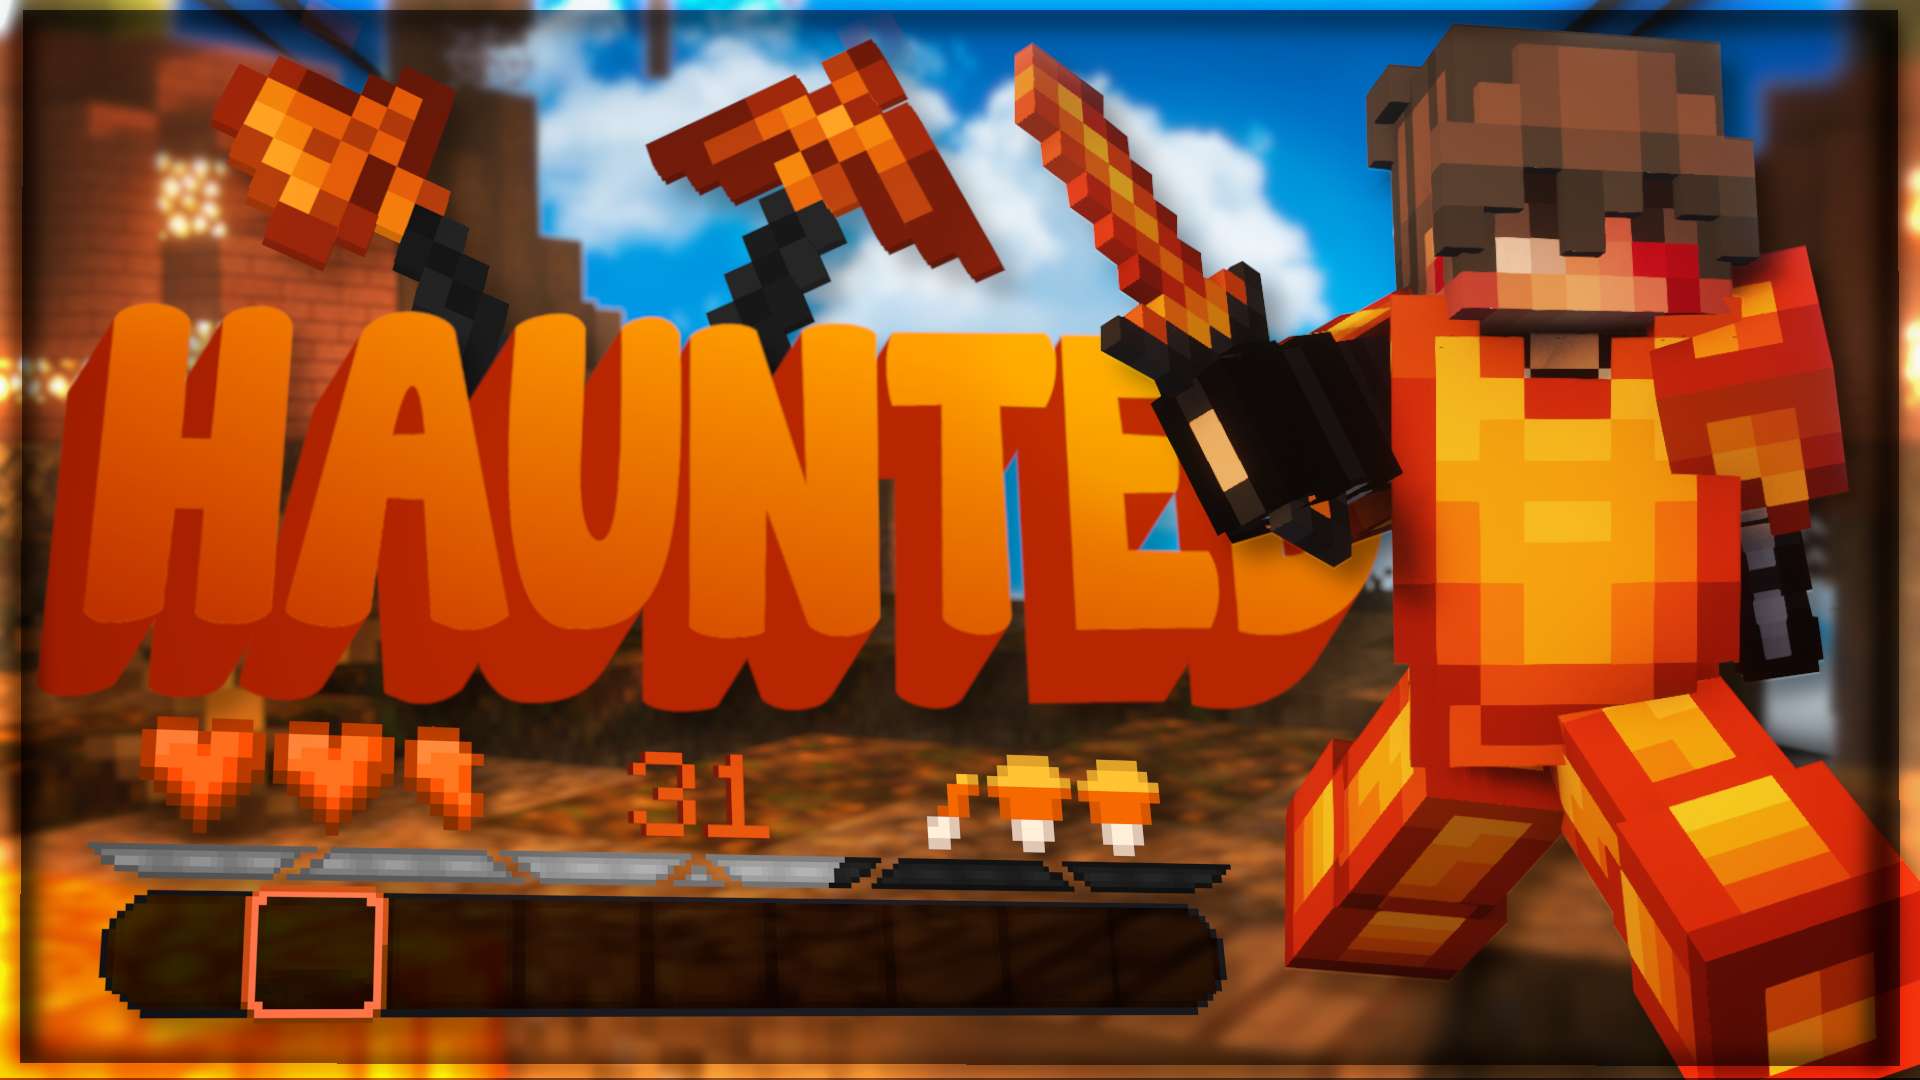 Haunted 16x 16 by NotTaylaur on PvPRP